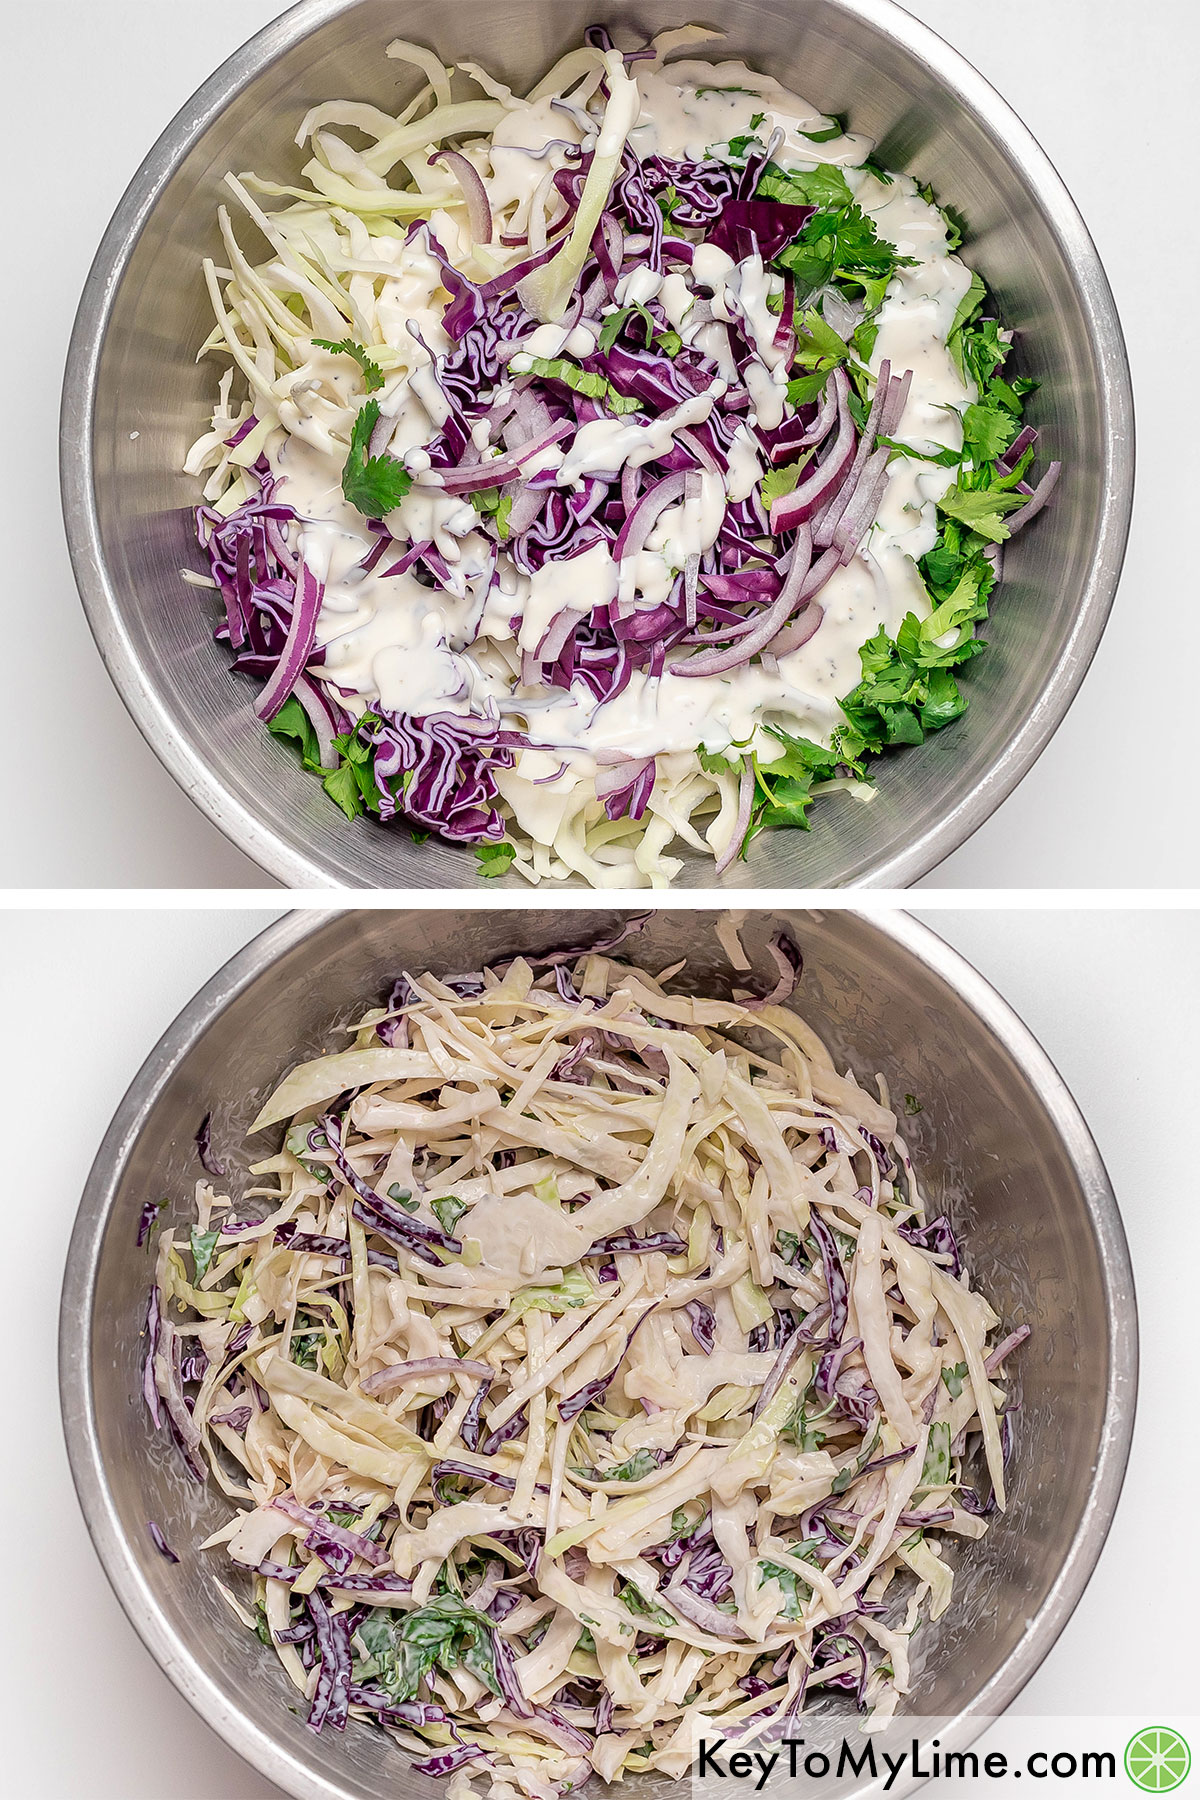 Adding the dressing to the coleslaw ingredients and tossing until fully incorporated.